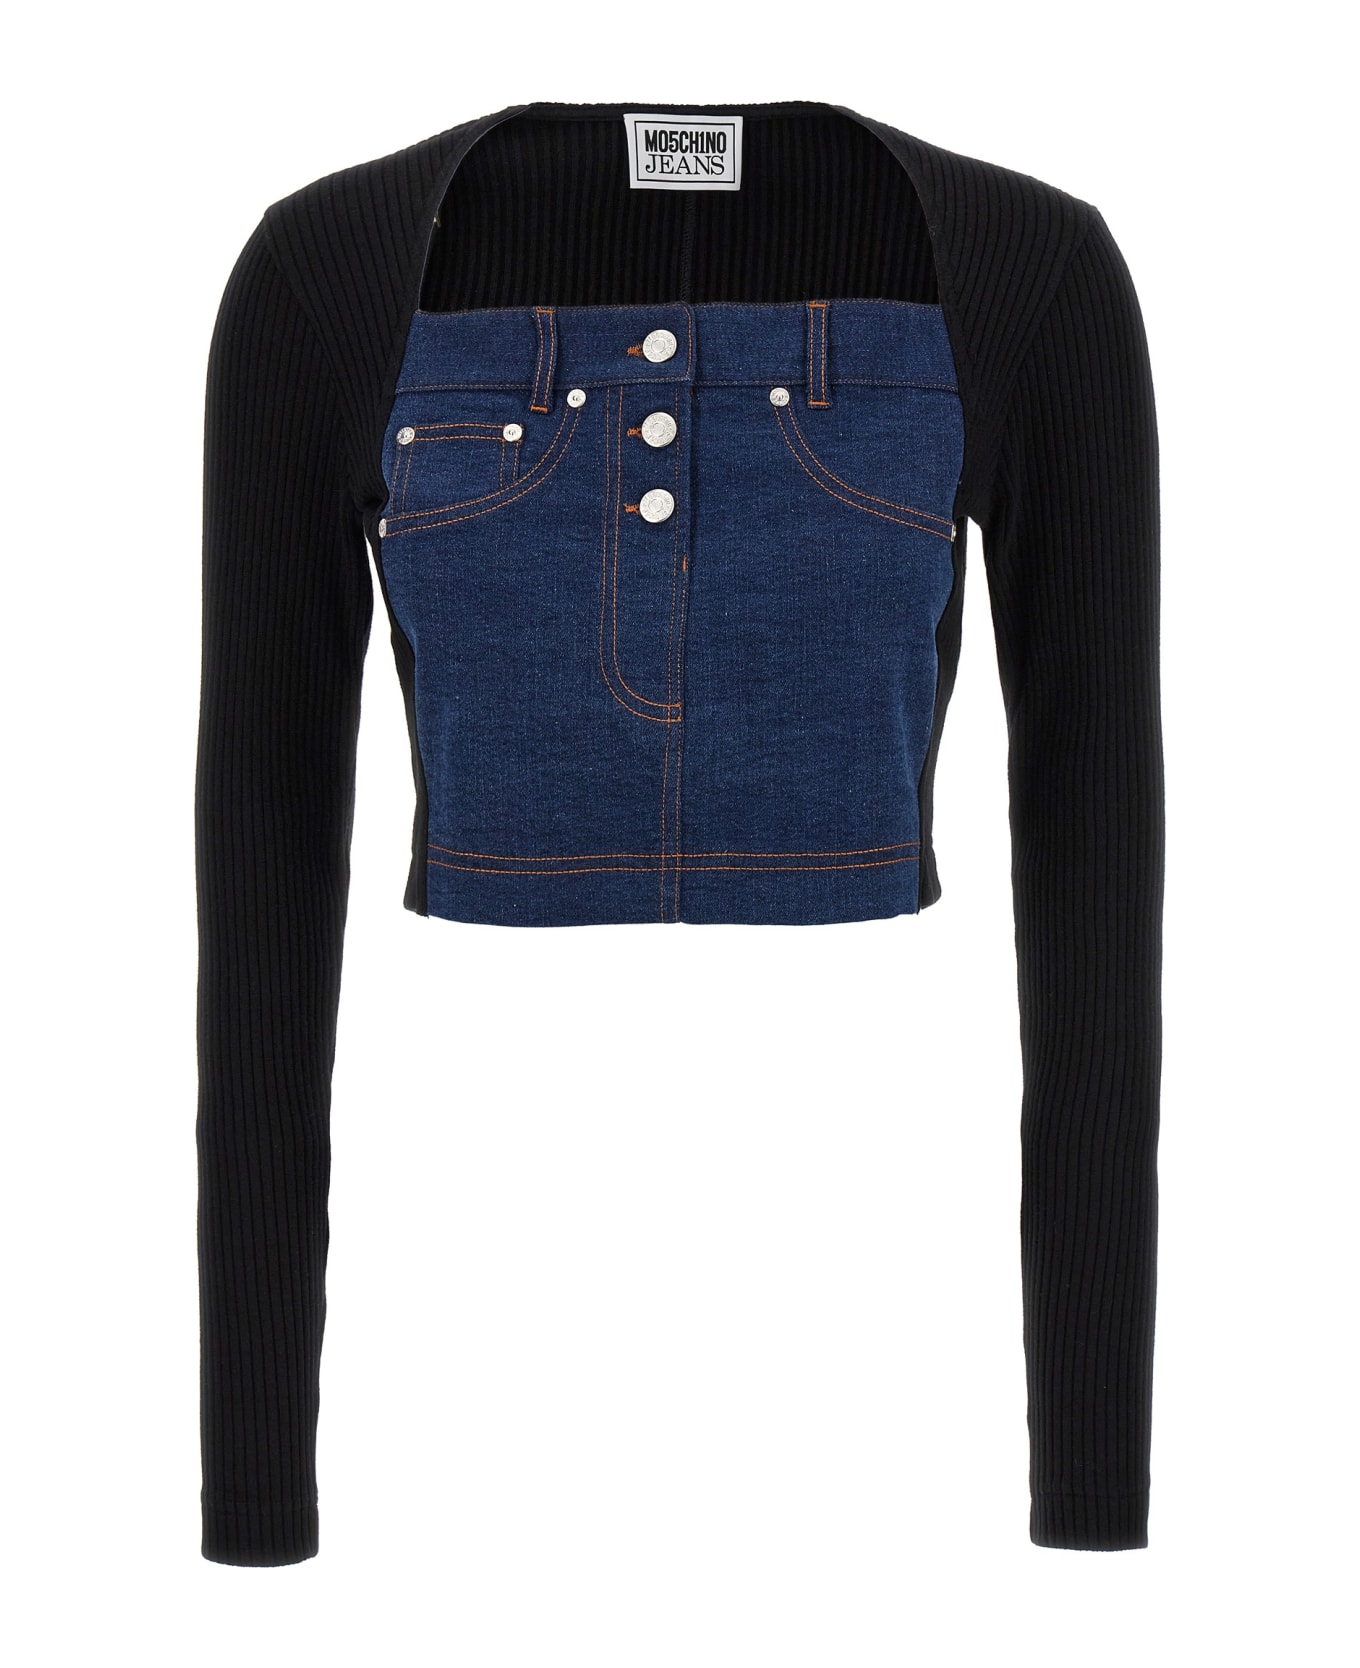 M05CH1N0 Jeans Denim Top And Ribbed Knit - BLACK/BLUE